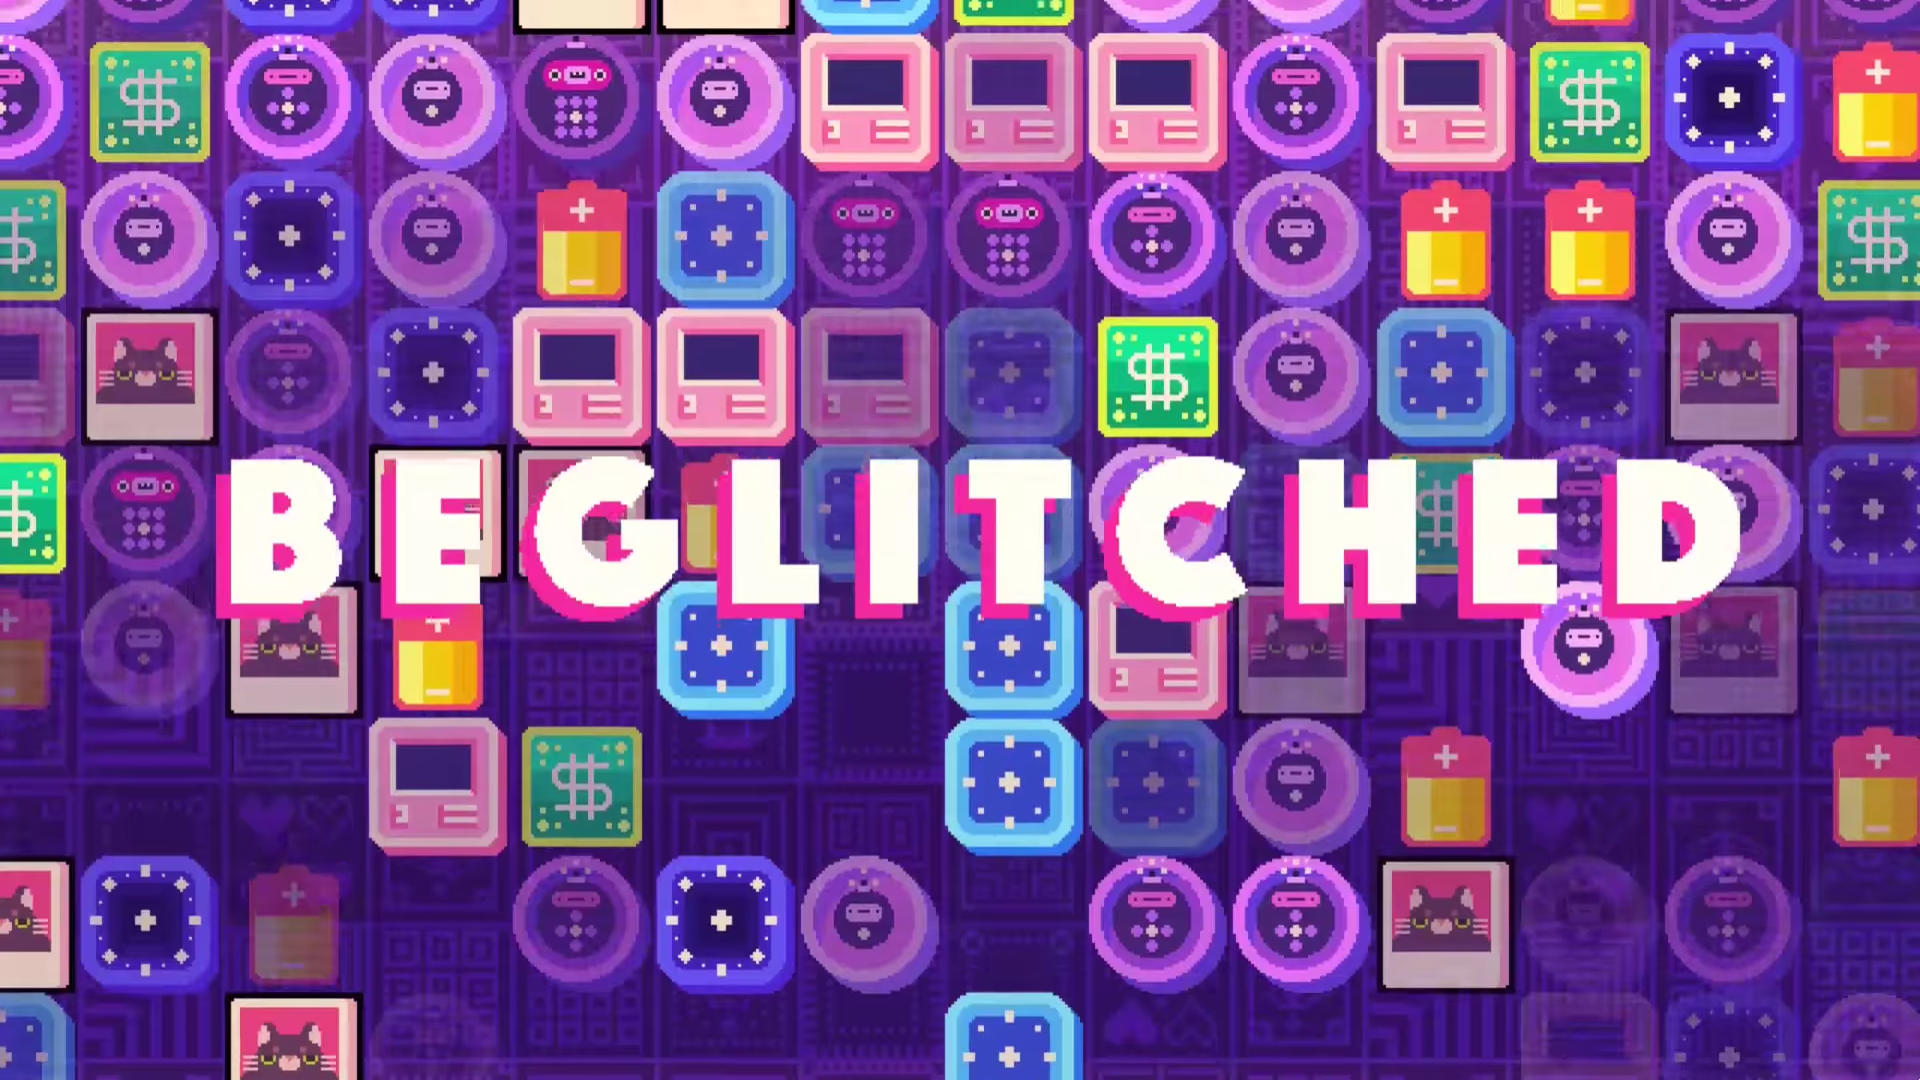 Beglitched is a Strange and Challenging Puzzler That’s Not for Everyone